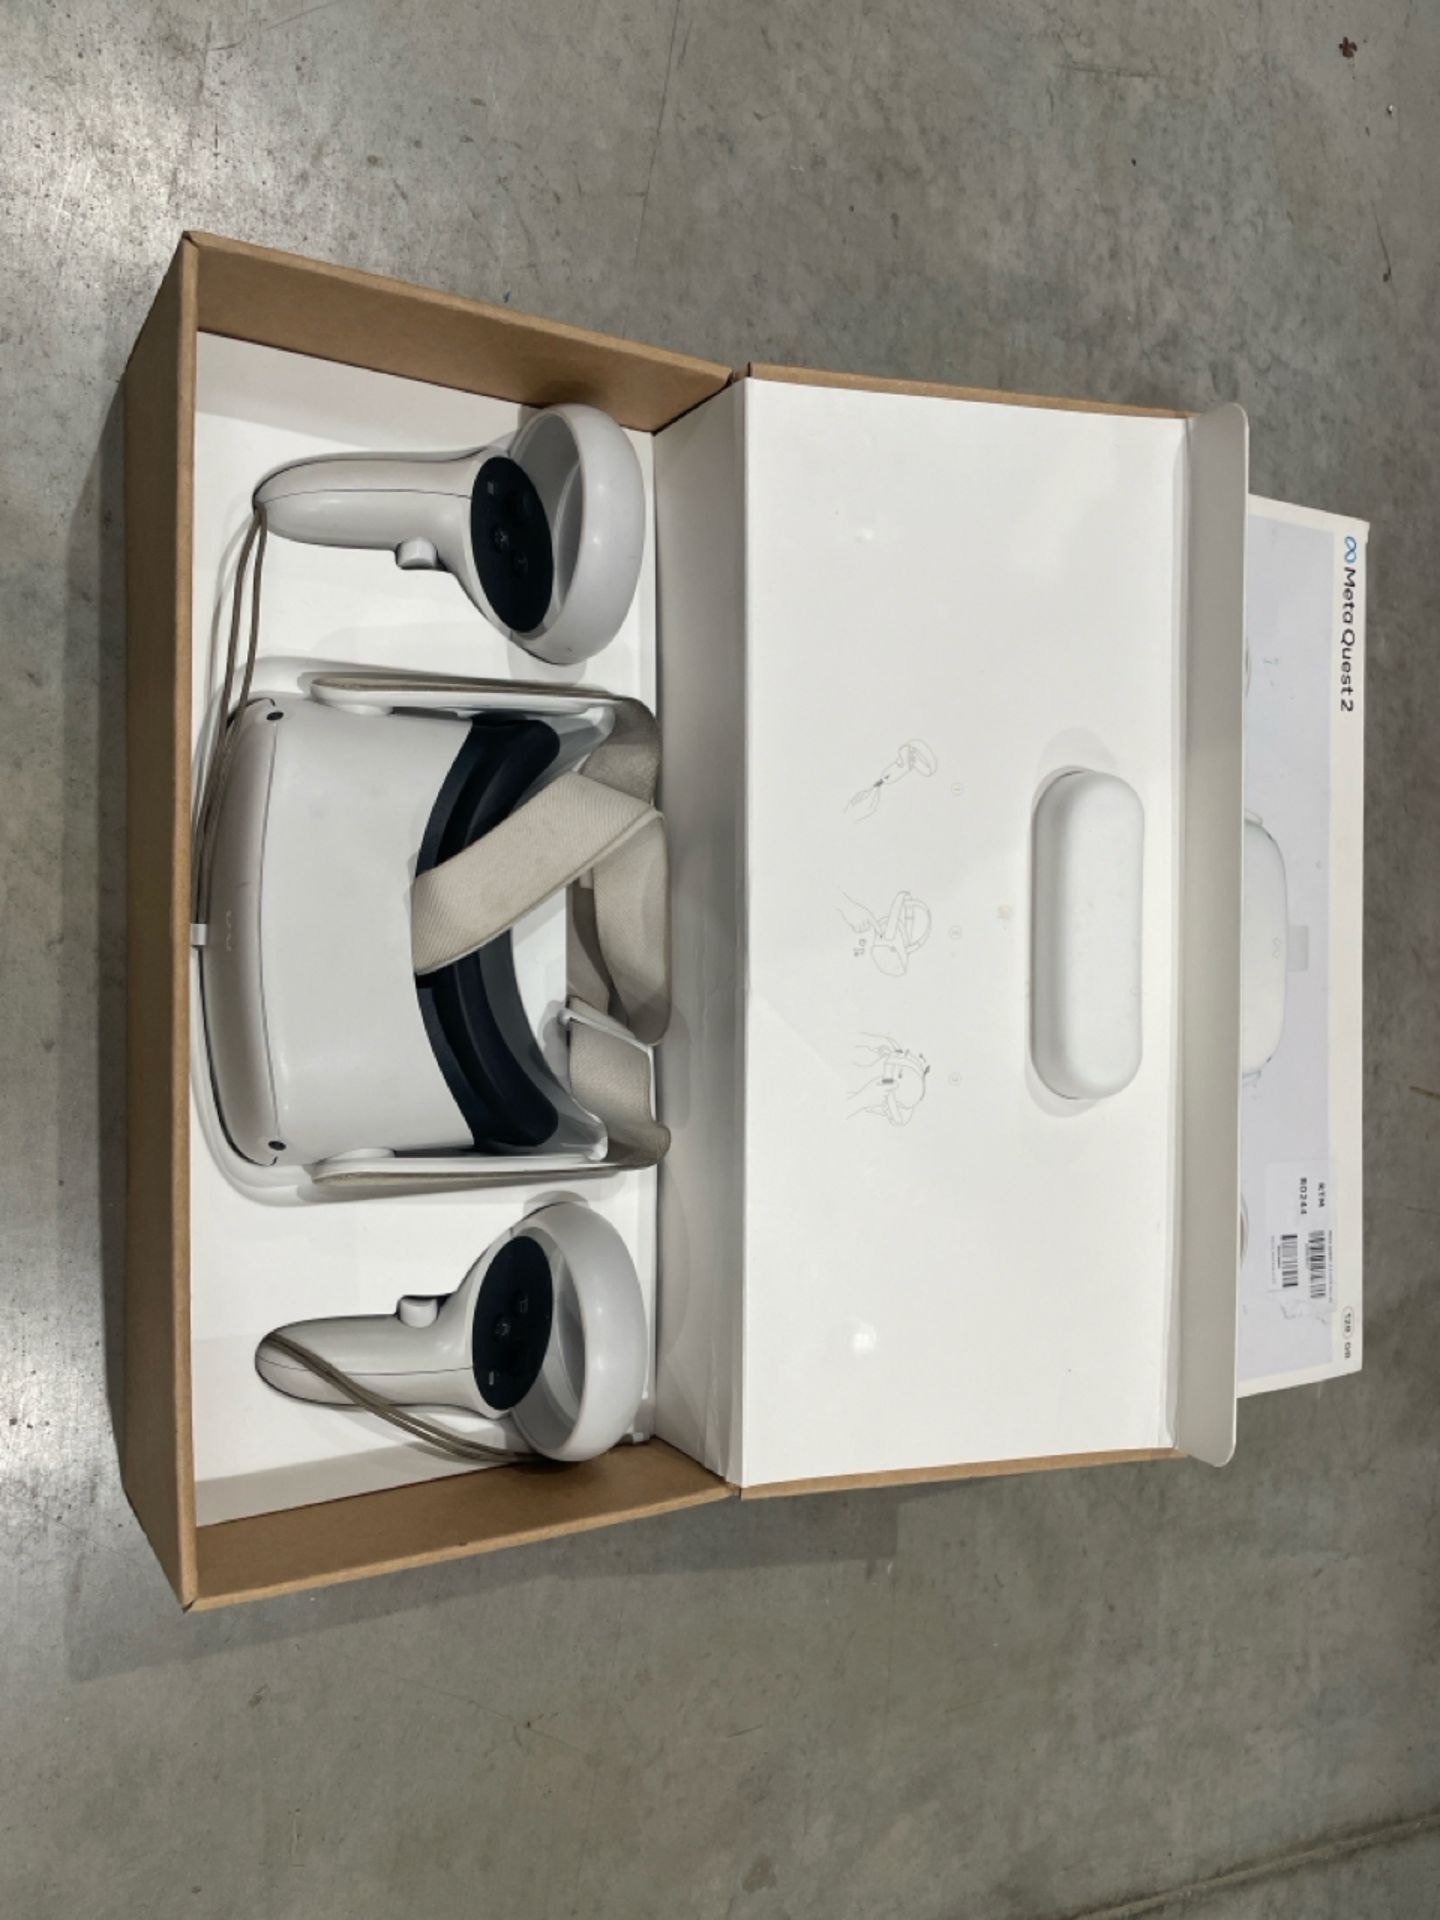 Meta Quest 2 VR Headset - Image 2 of 3